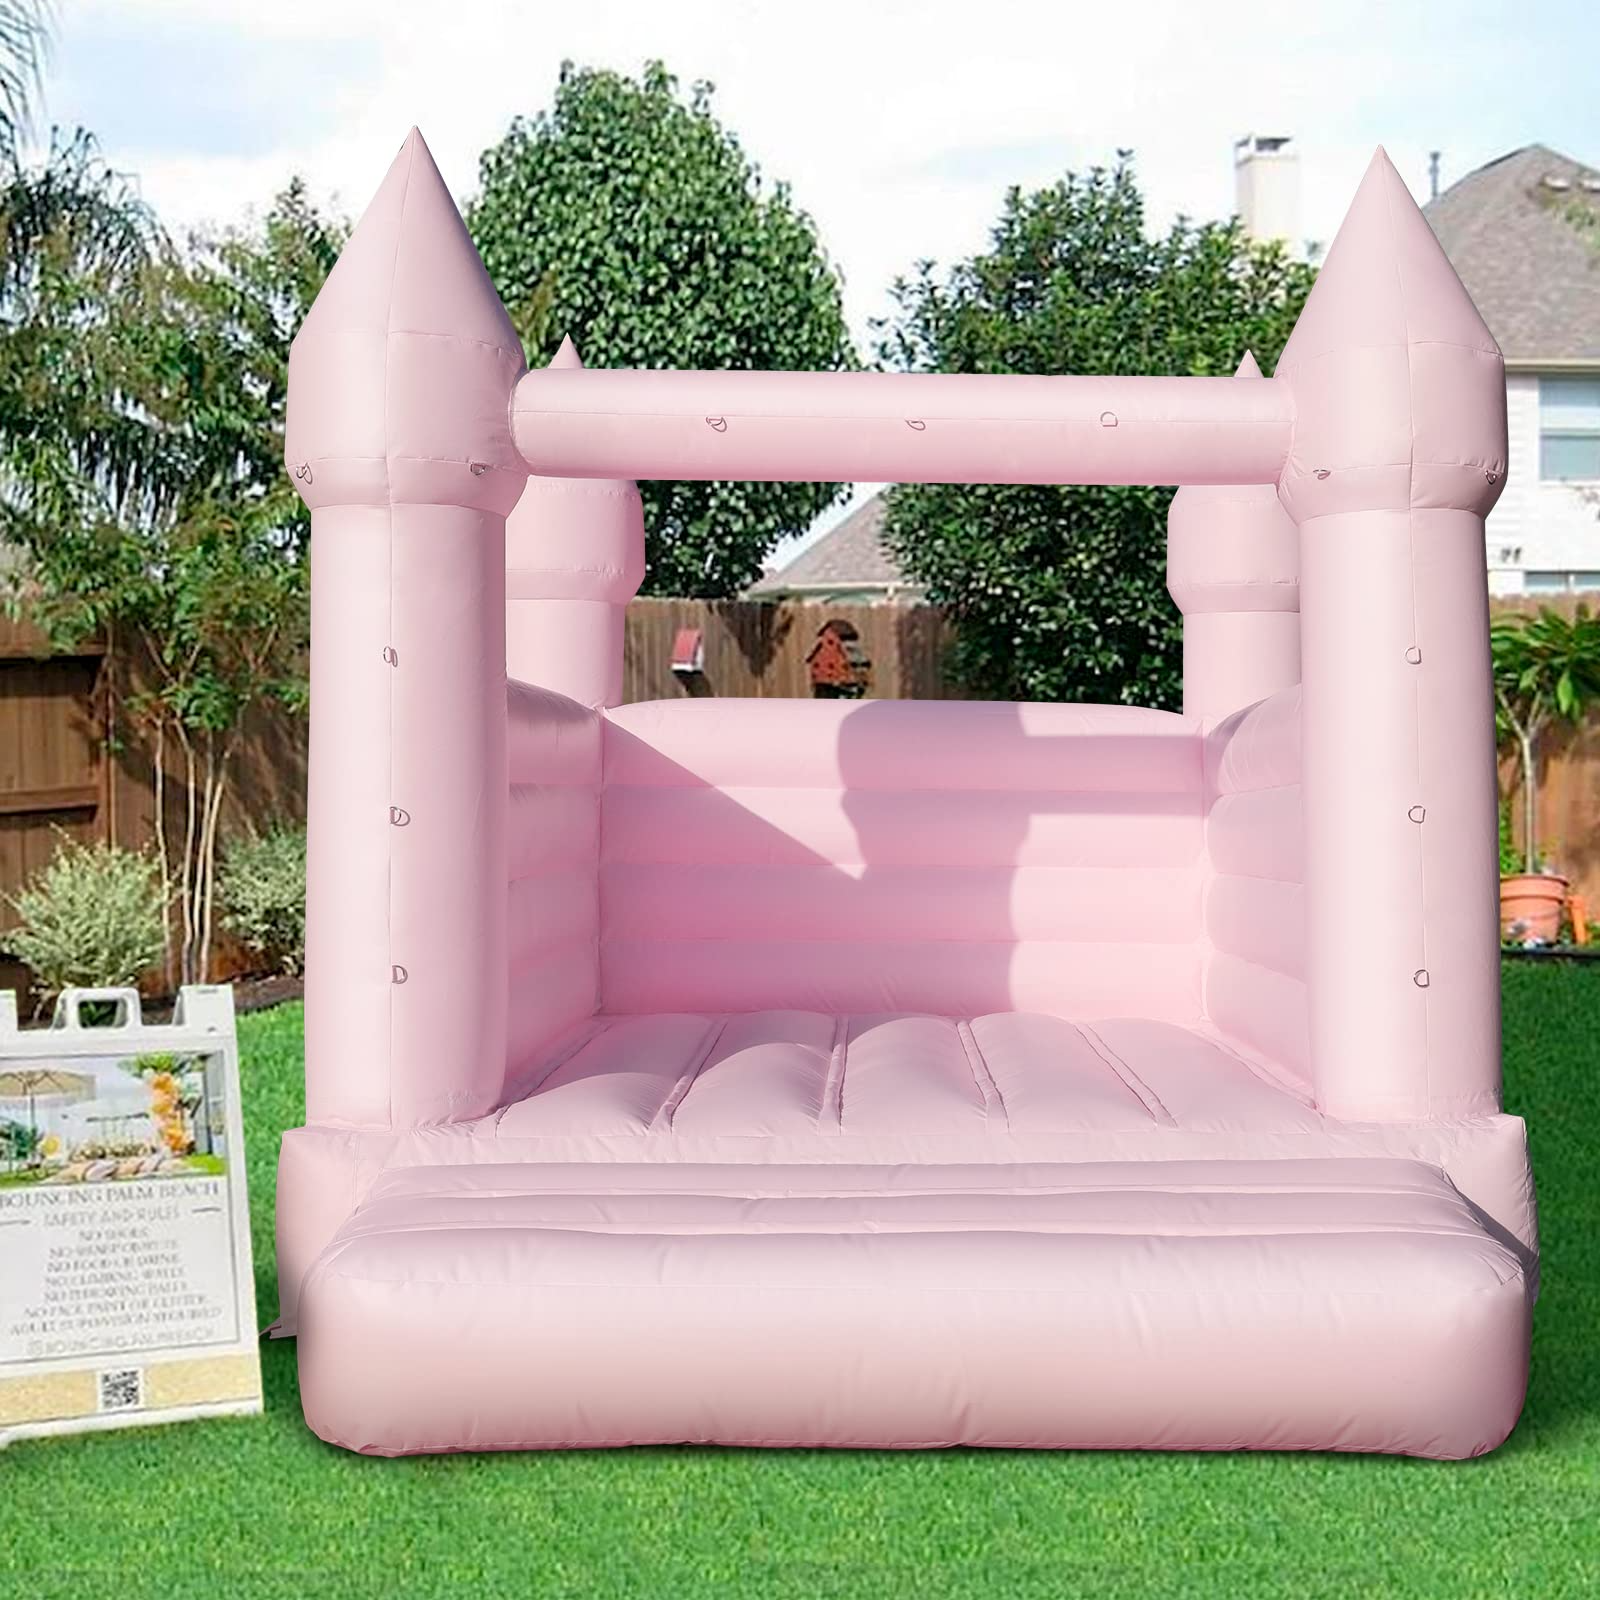 WARSUN Pink Bounce House 13x10x10FT / 4x3x3m with Blower 100% PVC Inflatable Bouncy House Castle with Large Jumping Area & D-Rings Decorate, Bounce House Castle for Wedding Birthday Party Photography Business